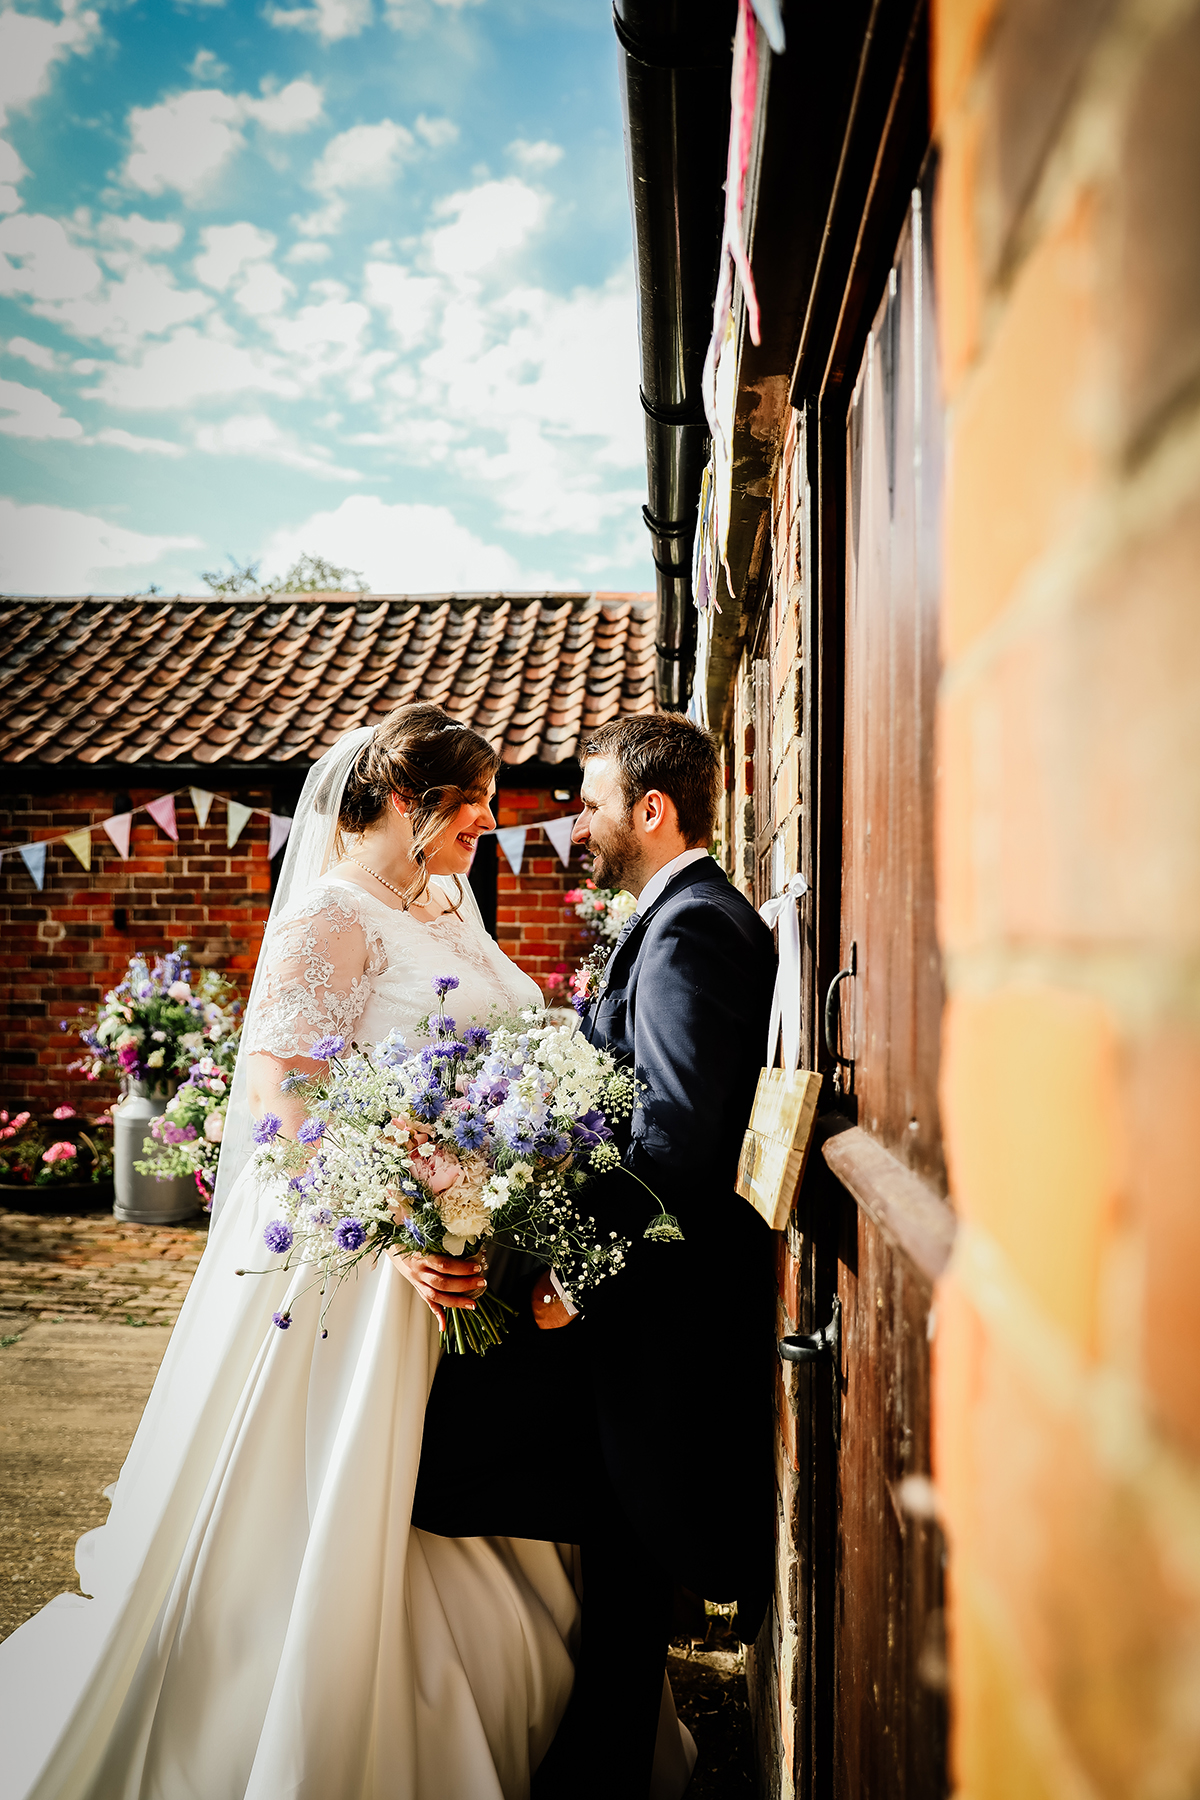 Lincolnshire Wedding Photographer - Louth Wedding Photographer - Church Wedding - Garden Party Wedding Photography - North Lincolnshire Wedding Photographer